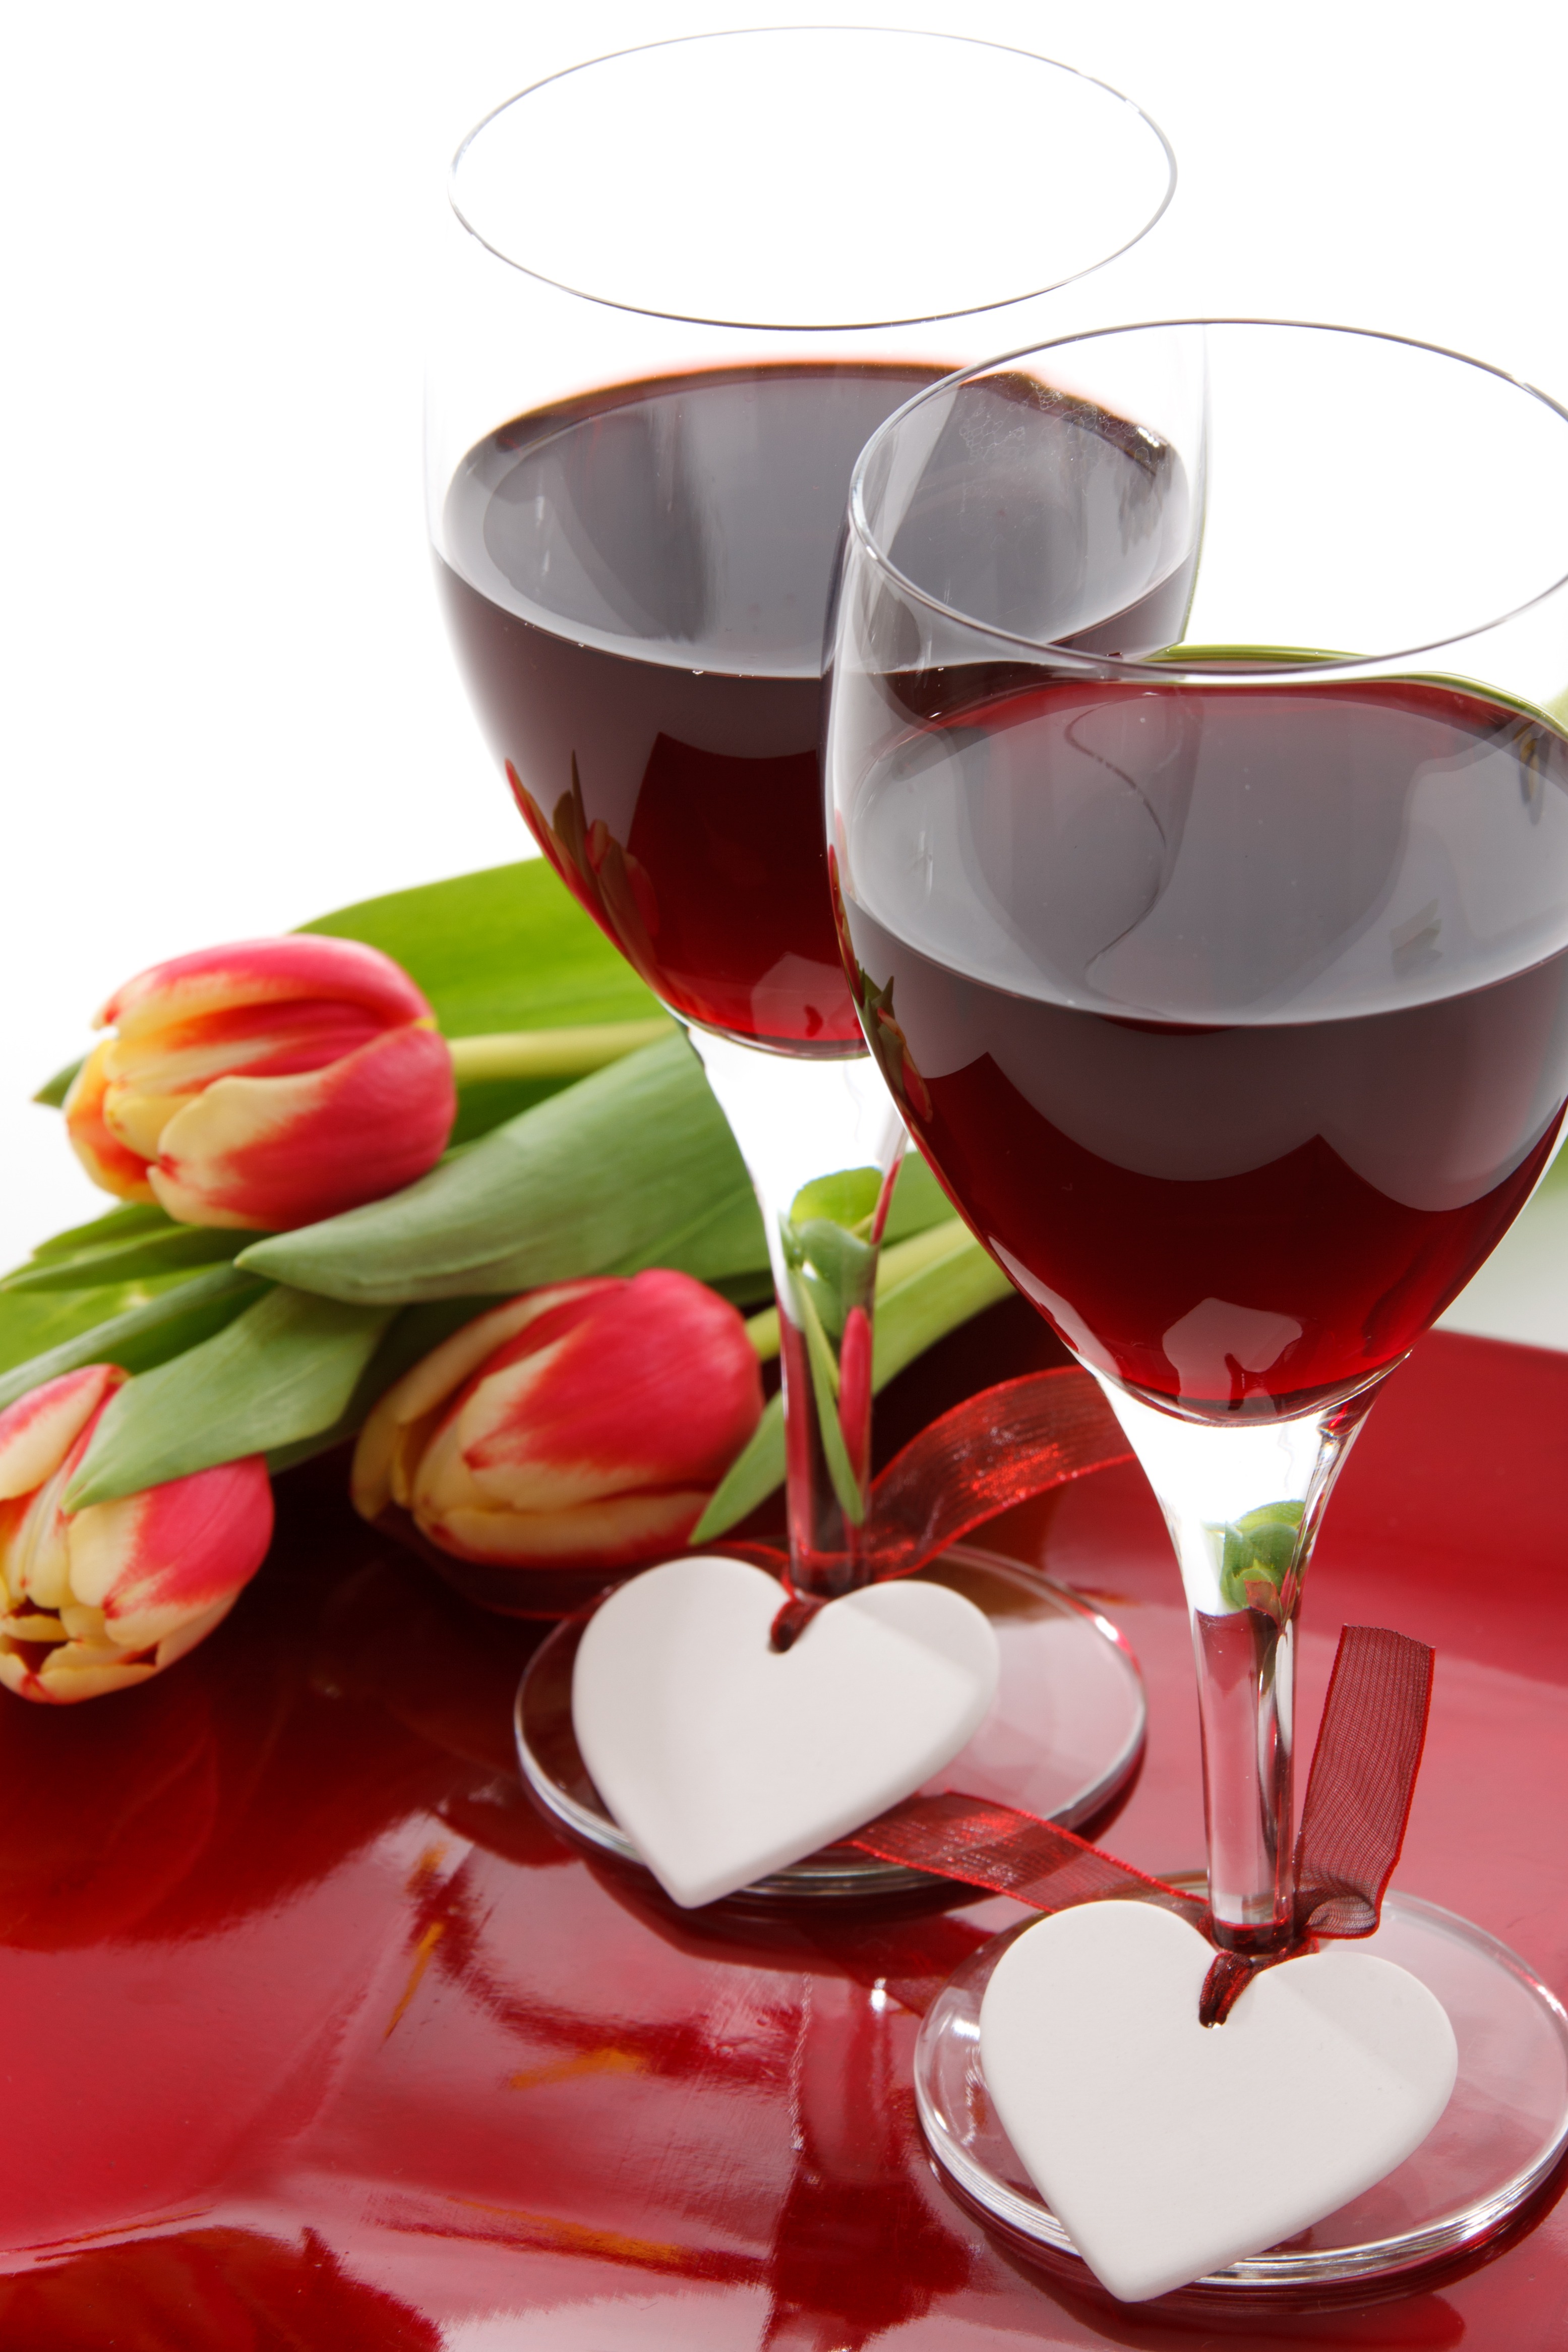 Two glasses of red wine and tulips.